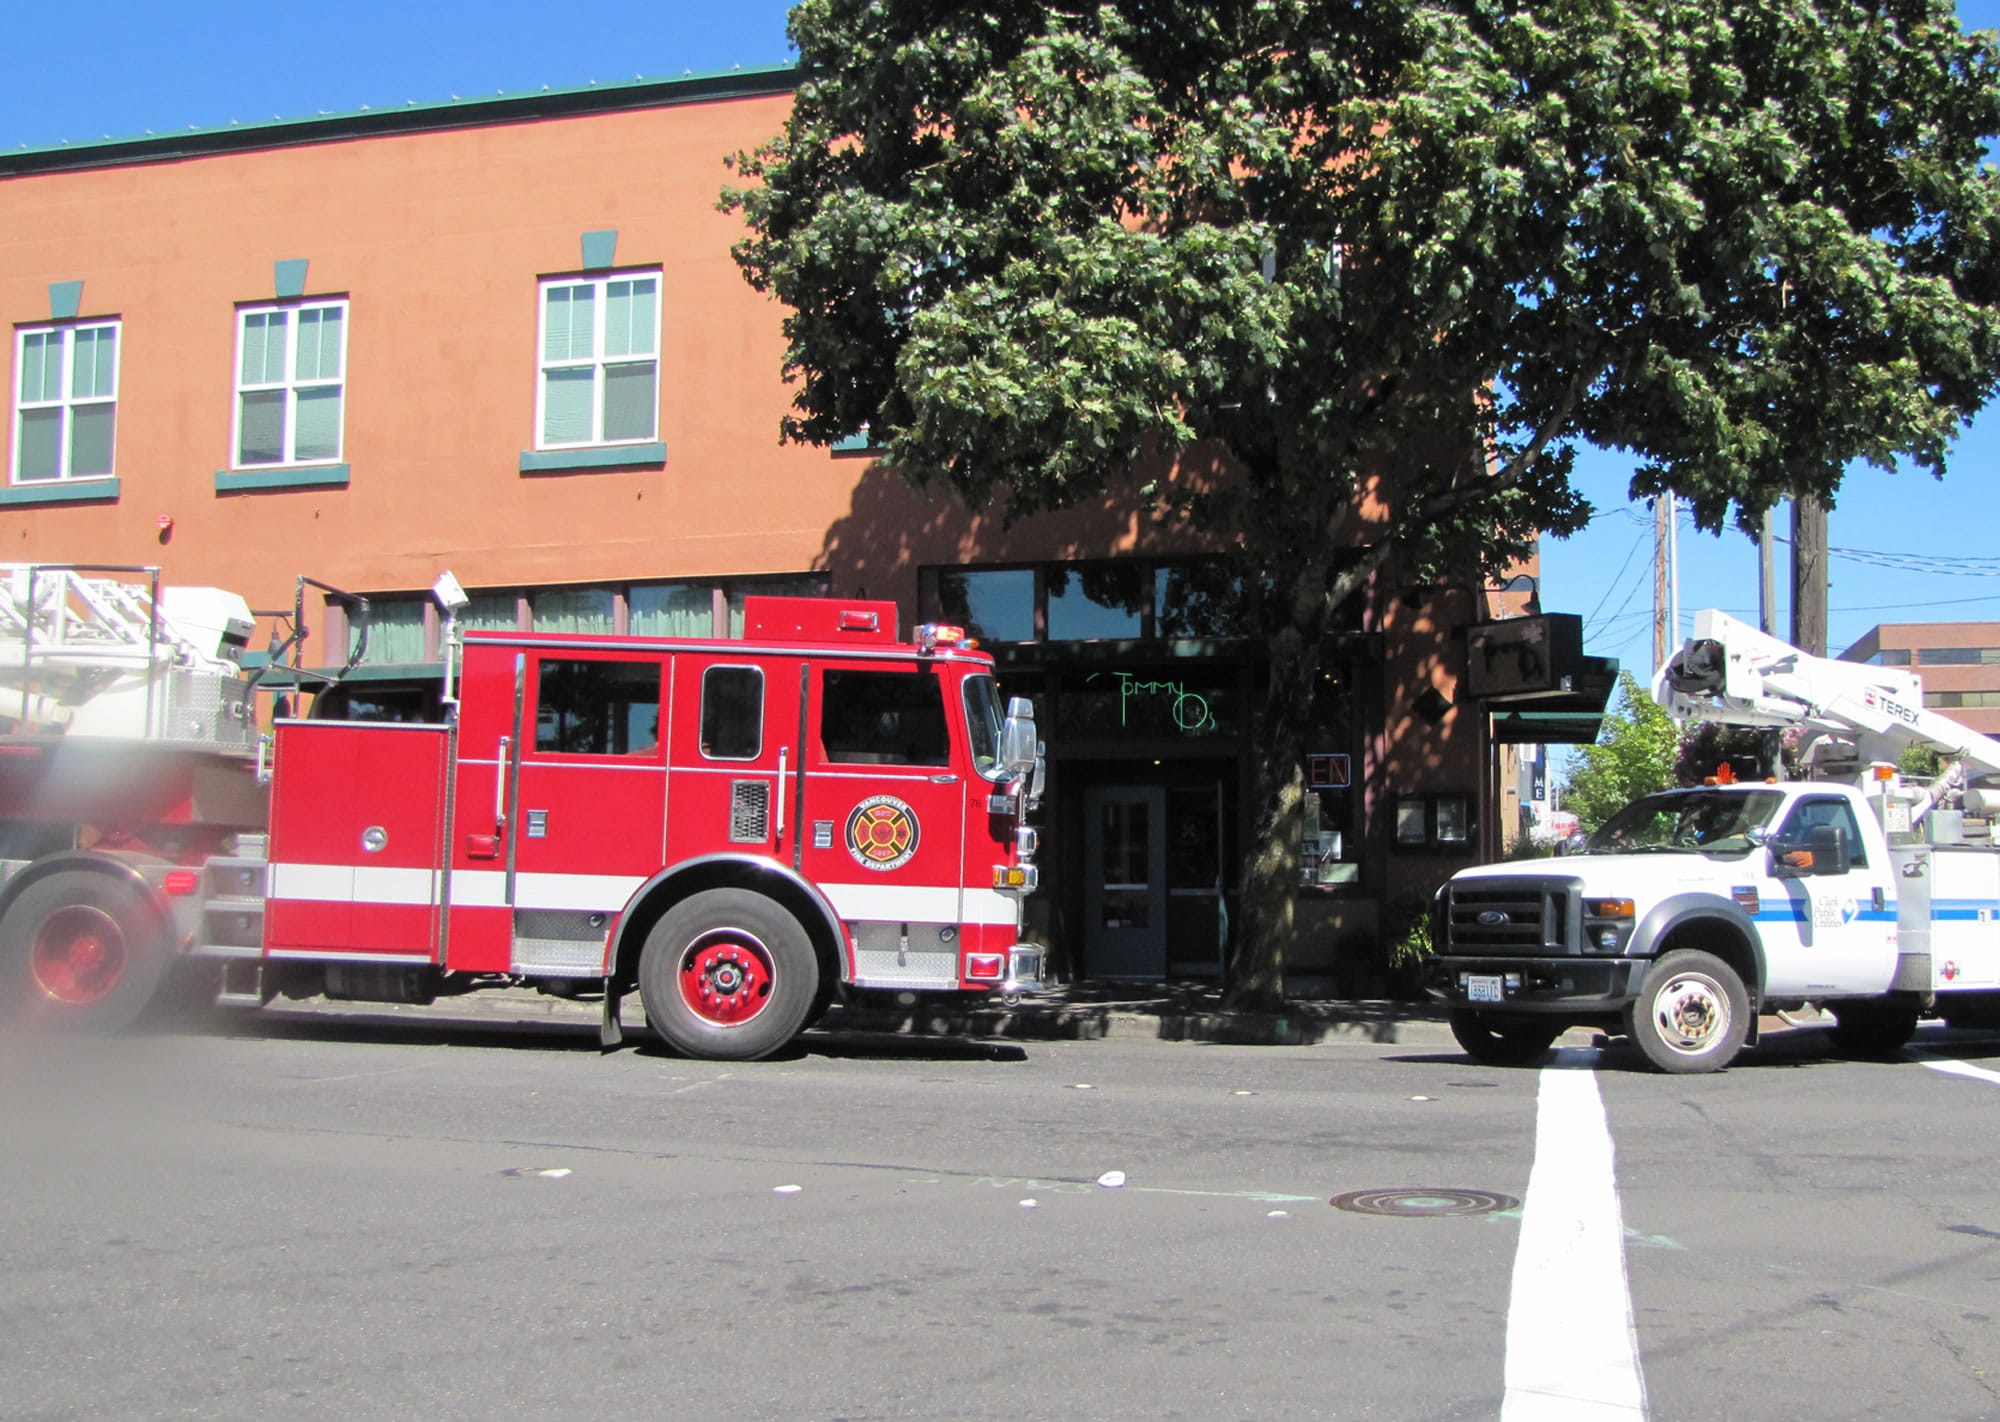 Staff at Tommy O's restaurant in Vancouver called 9-1-1 after they noticed smoke coming from behind the oven.